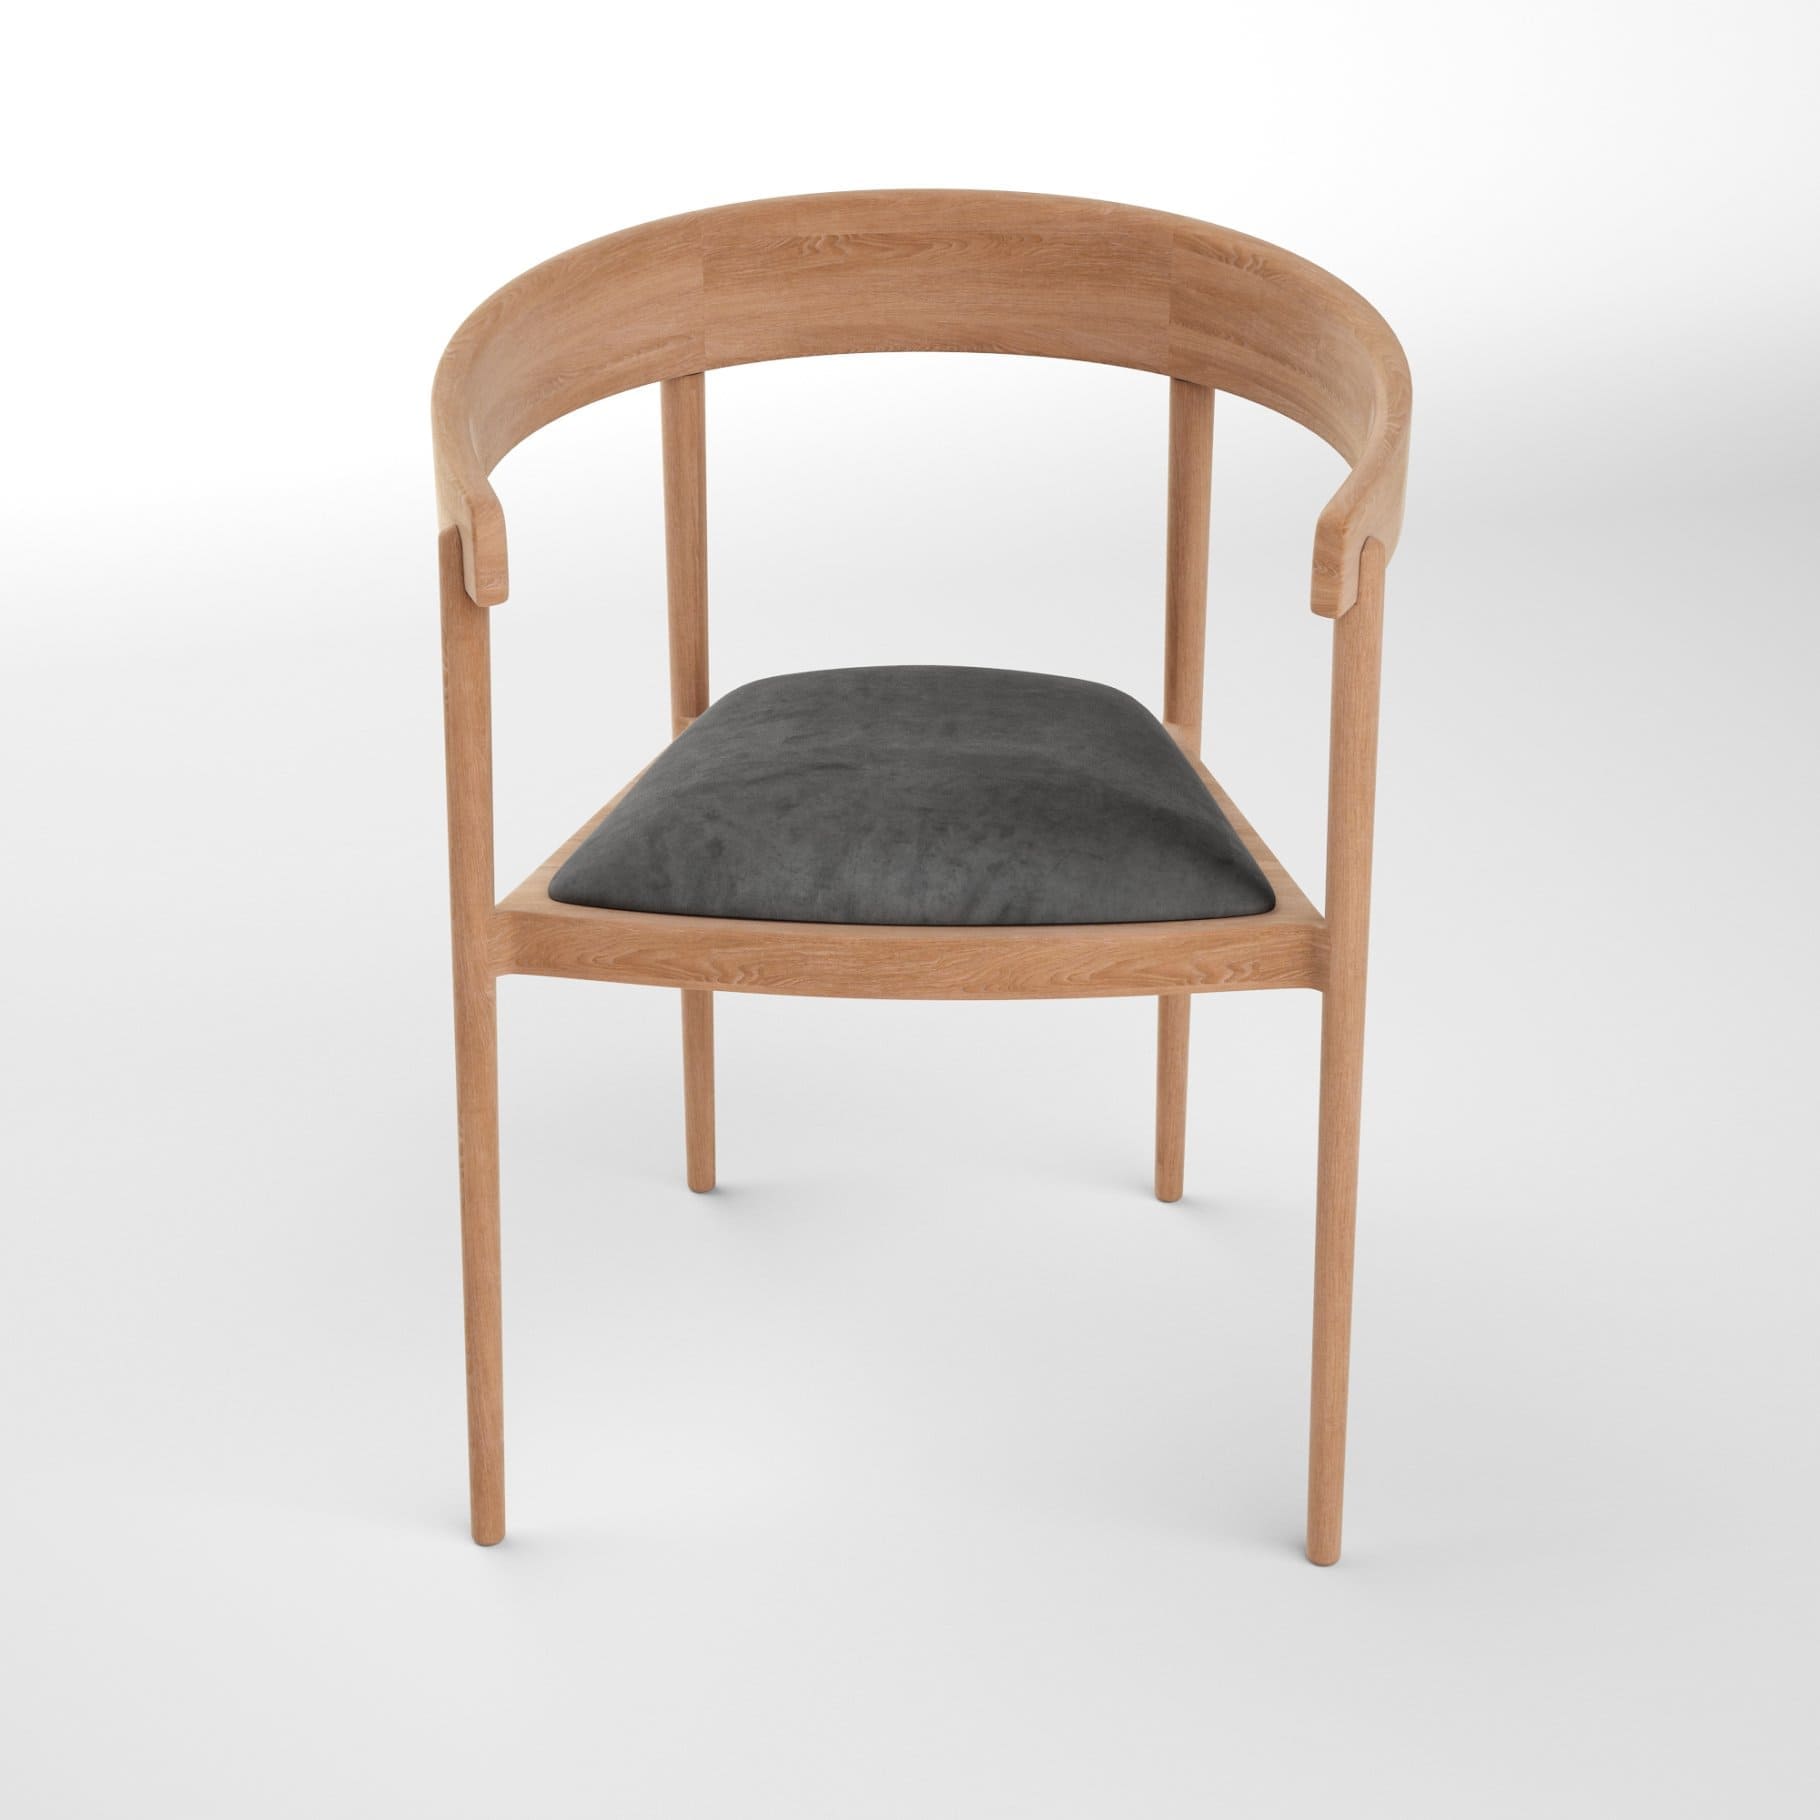 Semi-circular back from George Armchair Industry West.